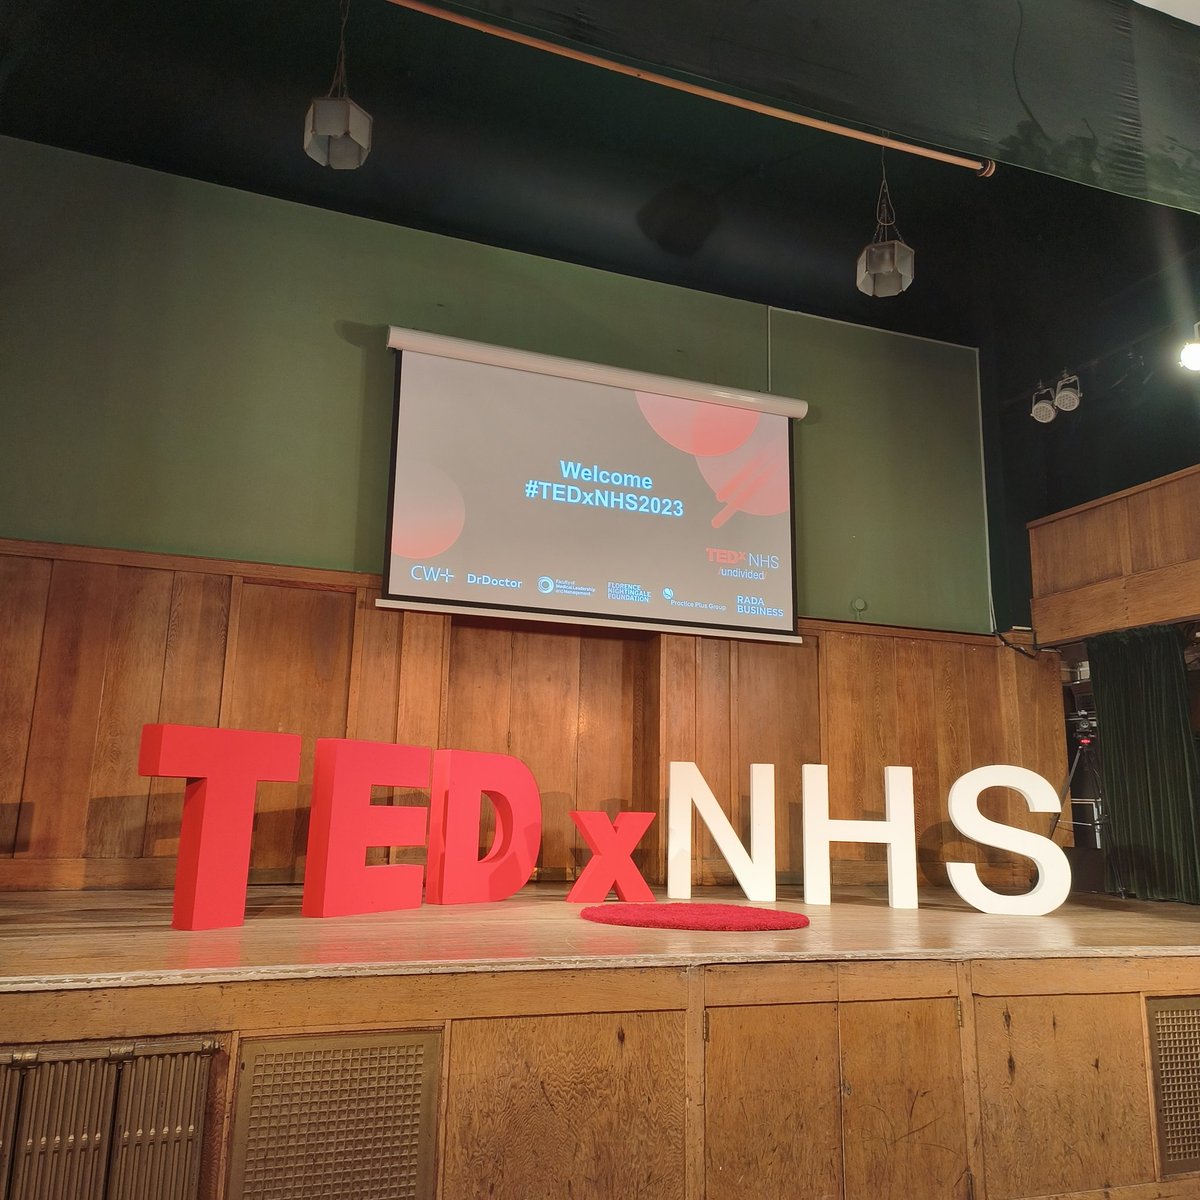 Excited for my Saturday! Bring on @TEDxNHS. Looking forward to seeing @westwood_greta from @FNightingaleF speak later too ❤️